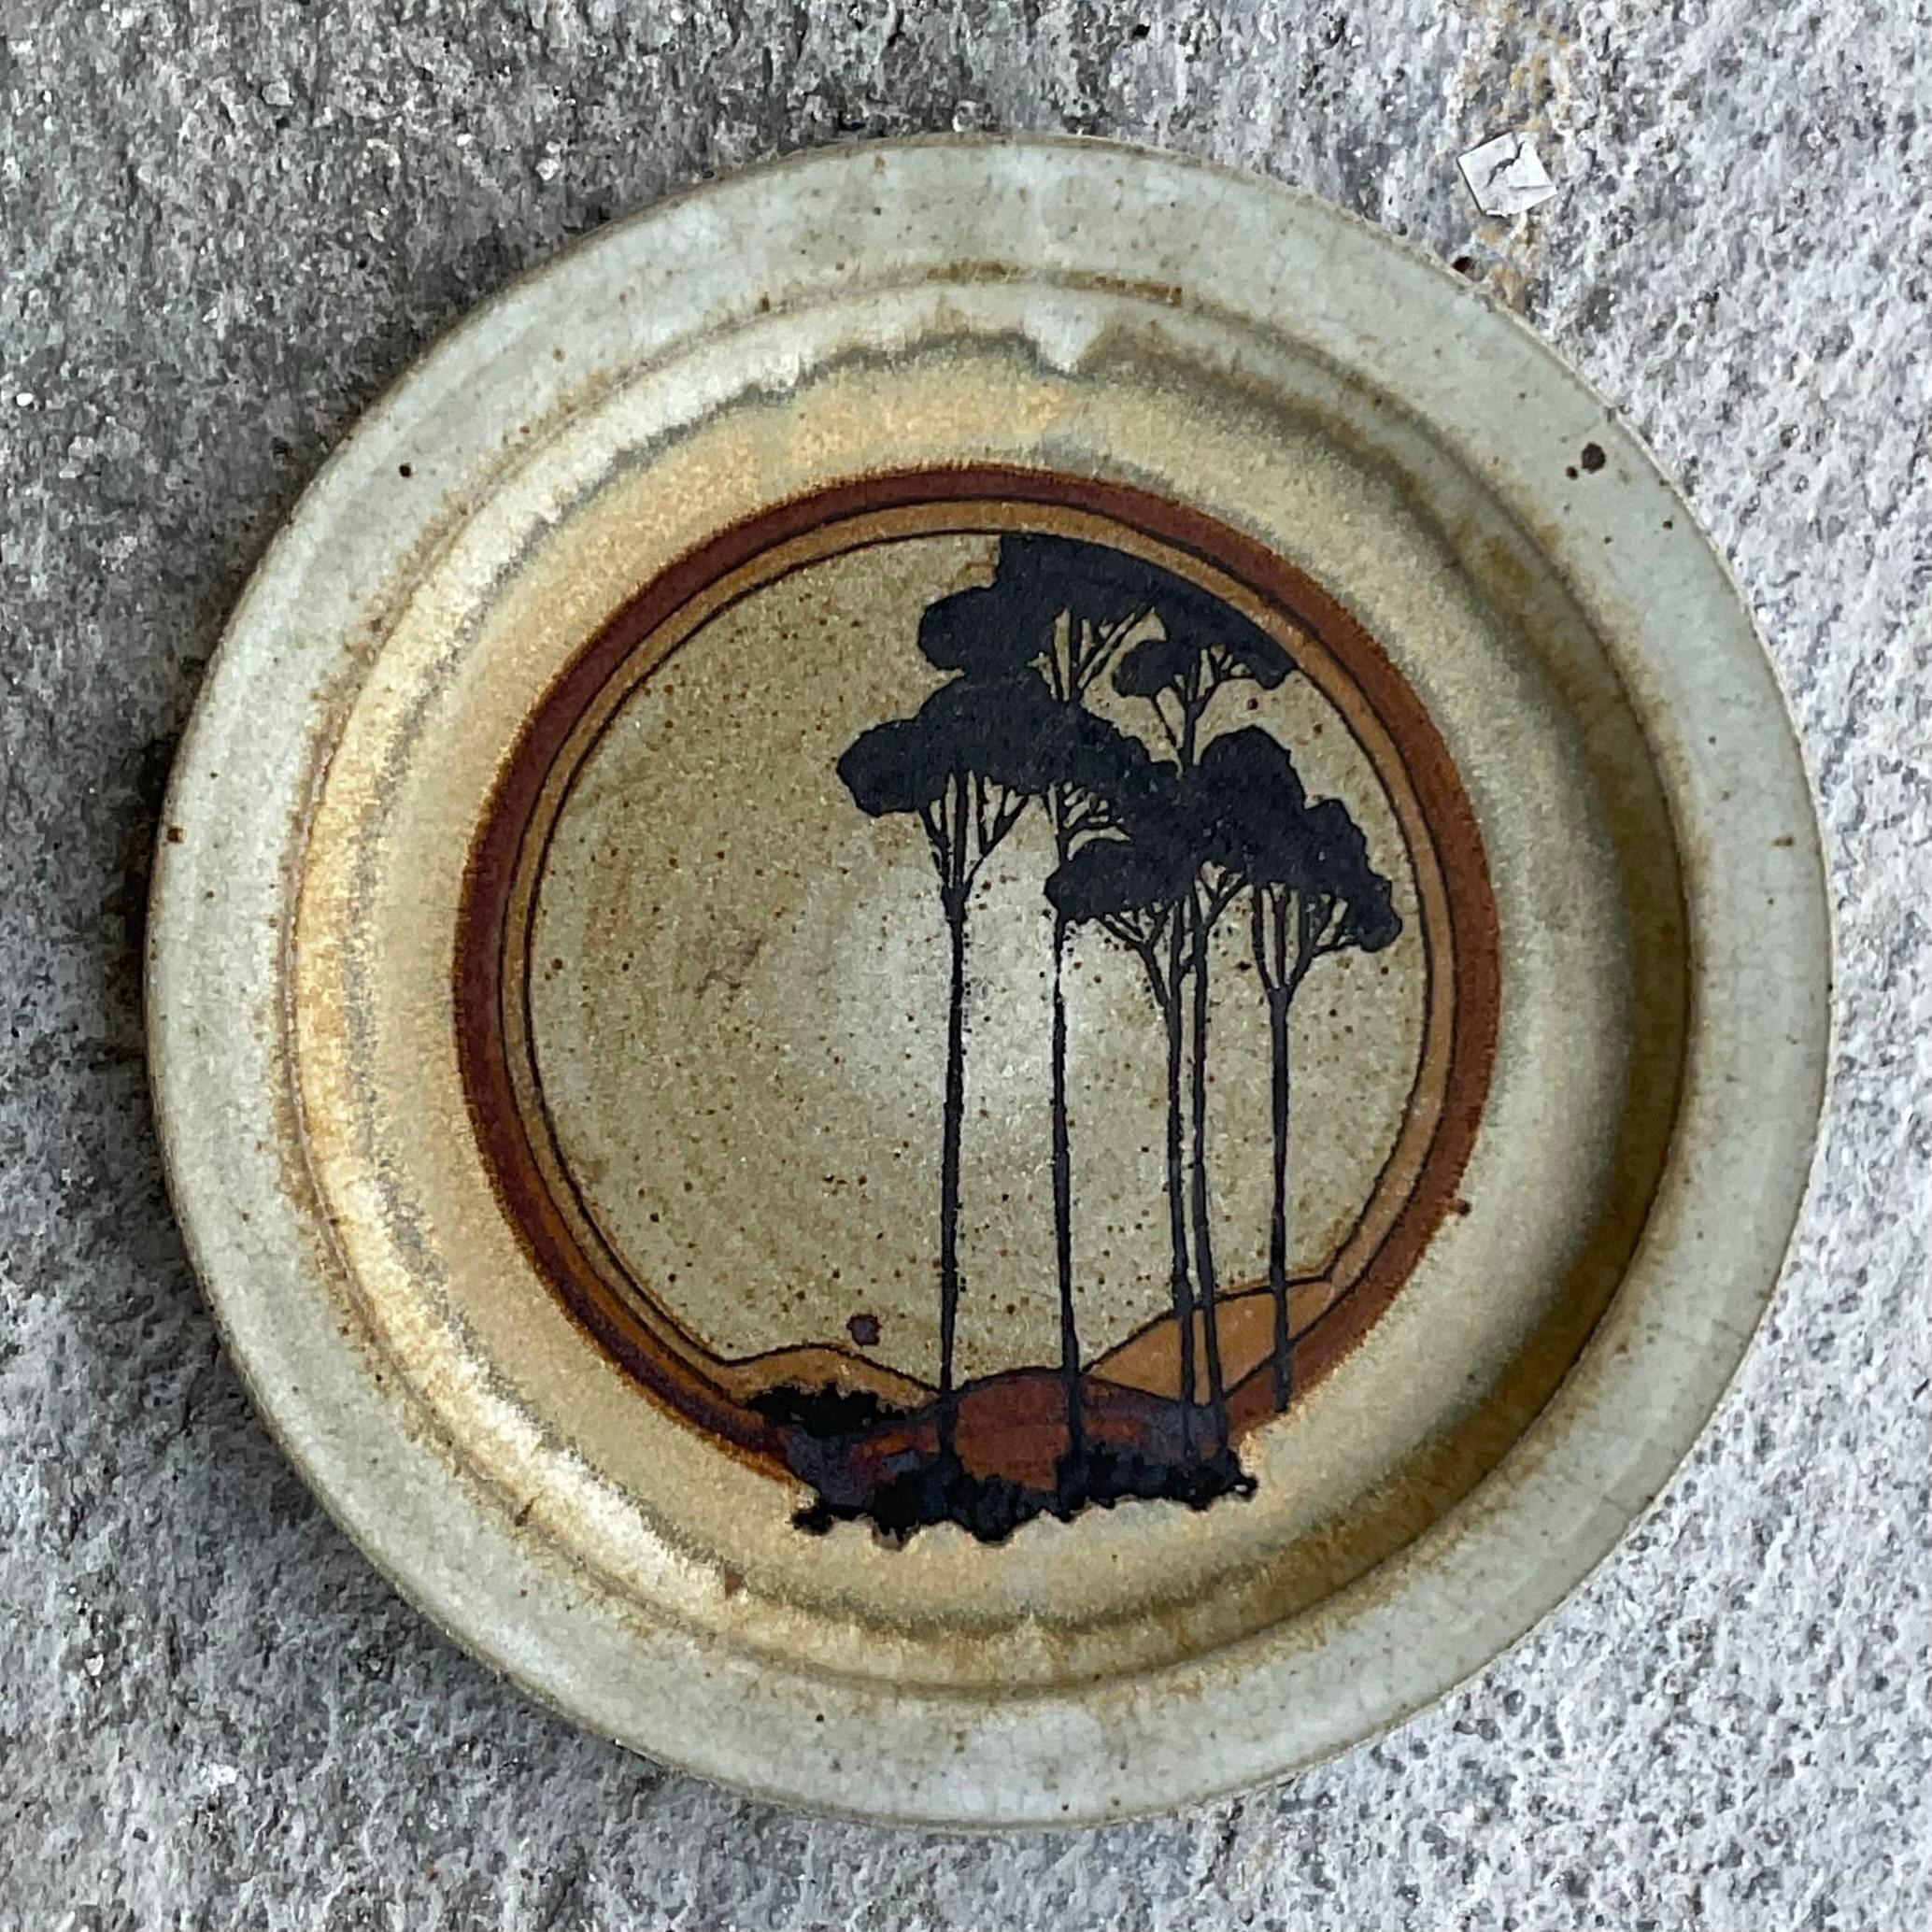 A fabulous vintage Boho studio pottery plate. Signed and dated 1974. A chic graphic compositions of trees. Super cool. Acquired from a Palm Beach estate 